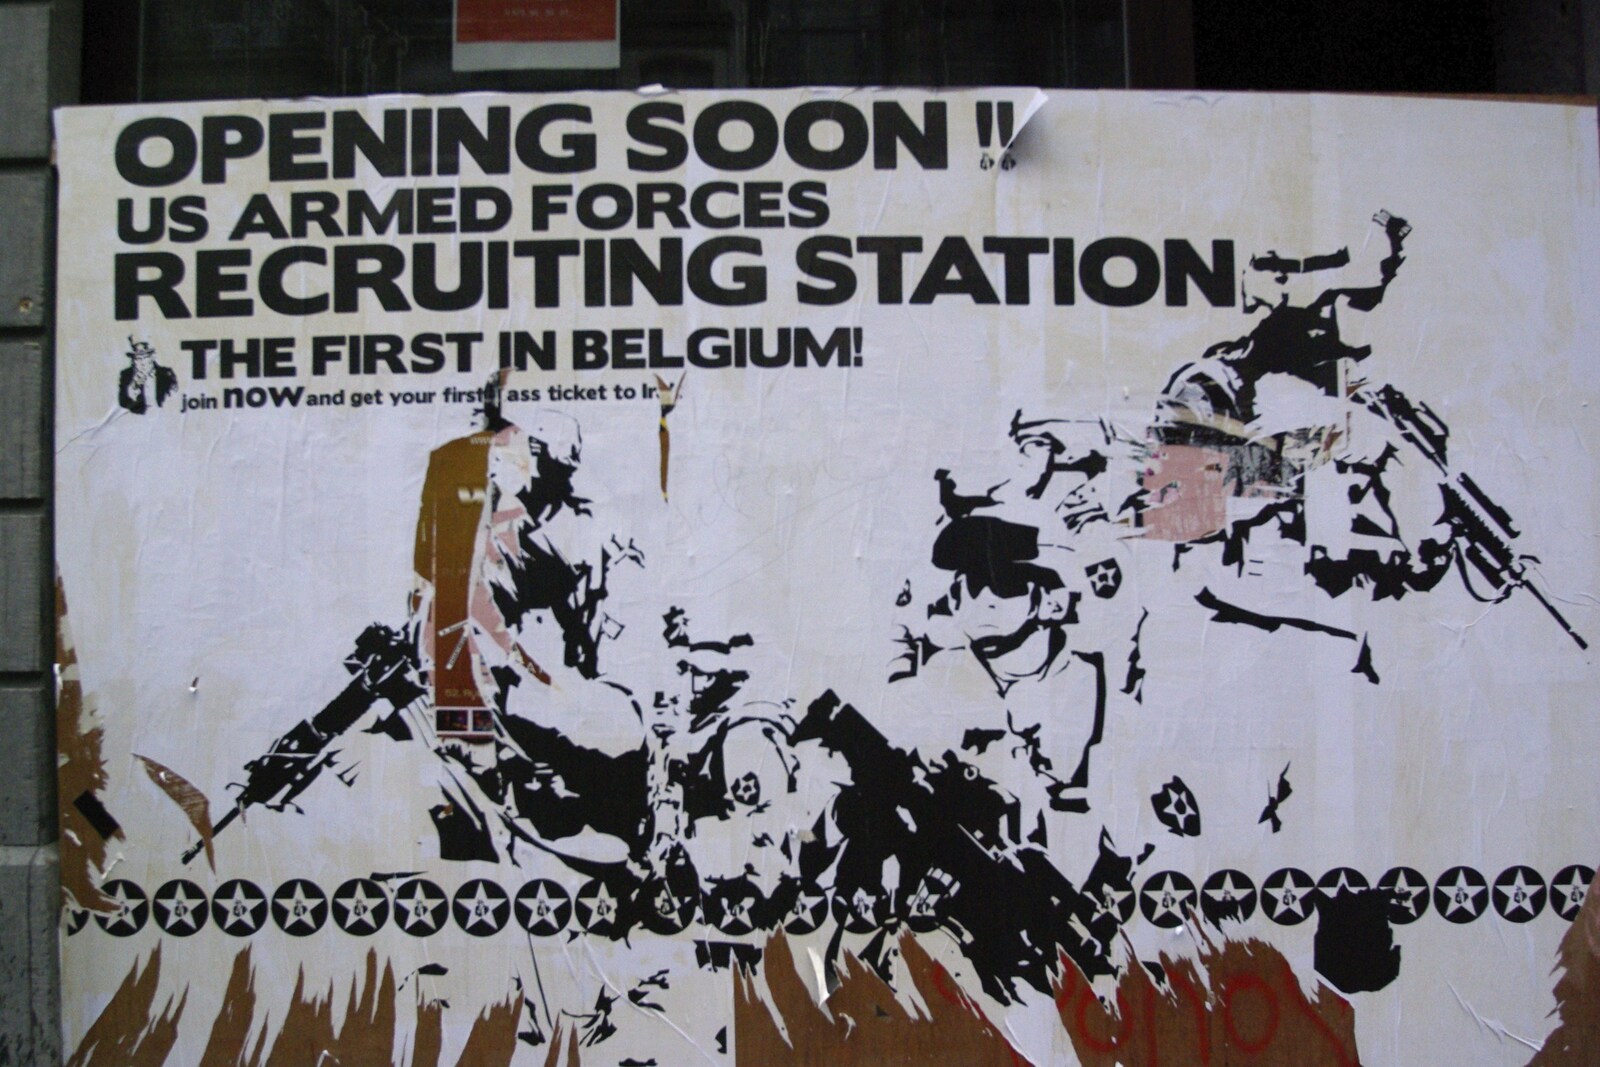 Satirical poster from The Christmas Markets of Brussels, Belgium - 1st January 2007